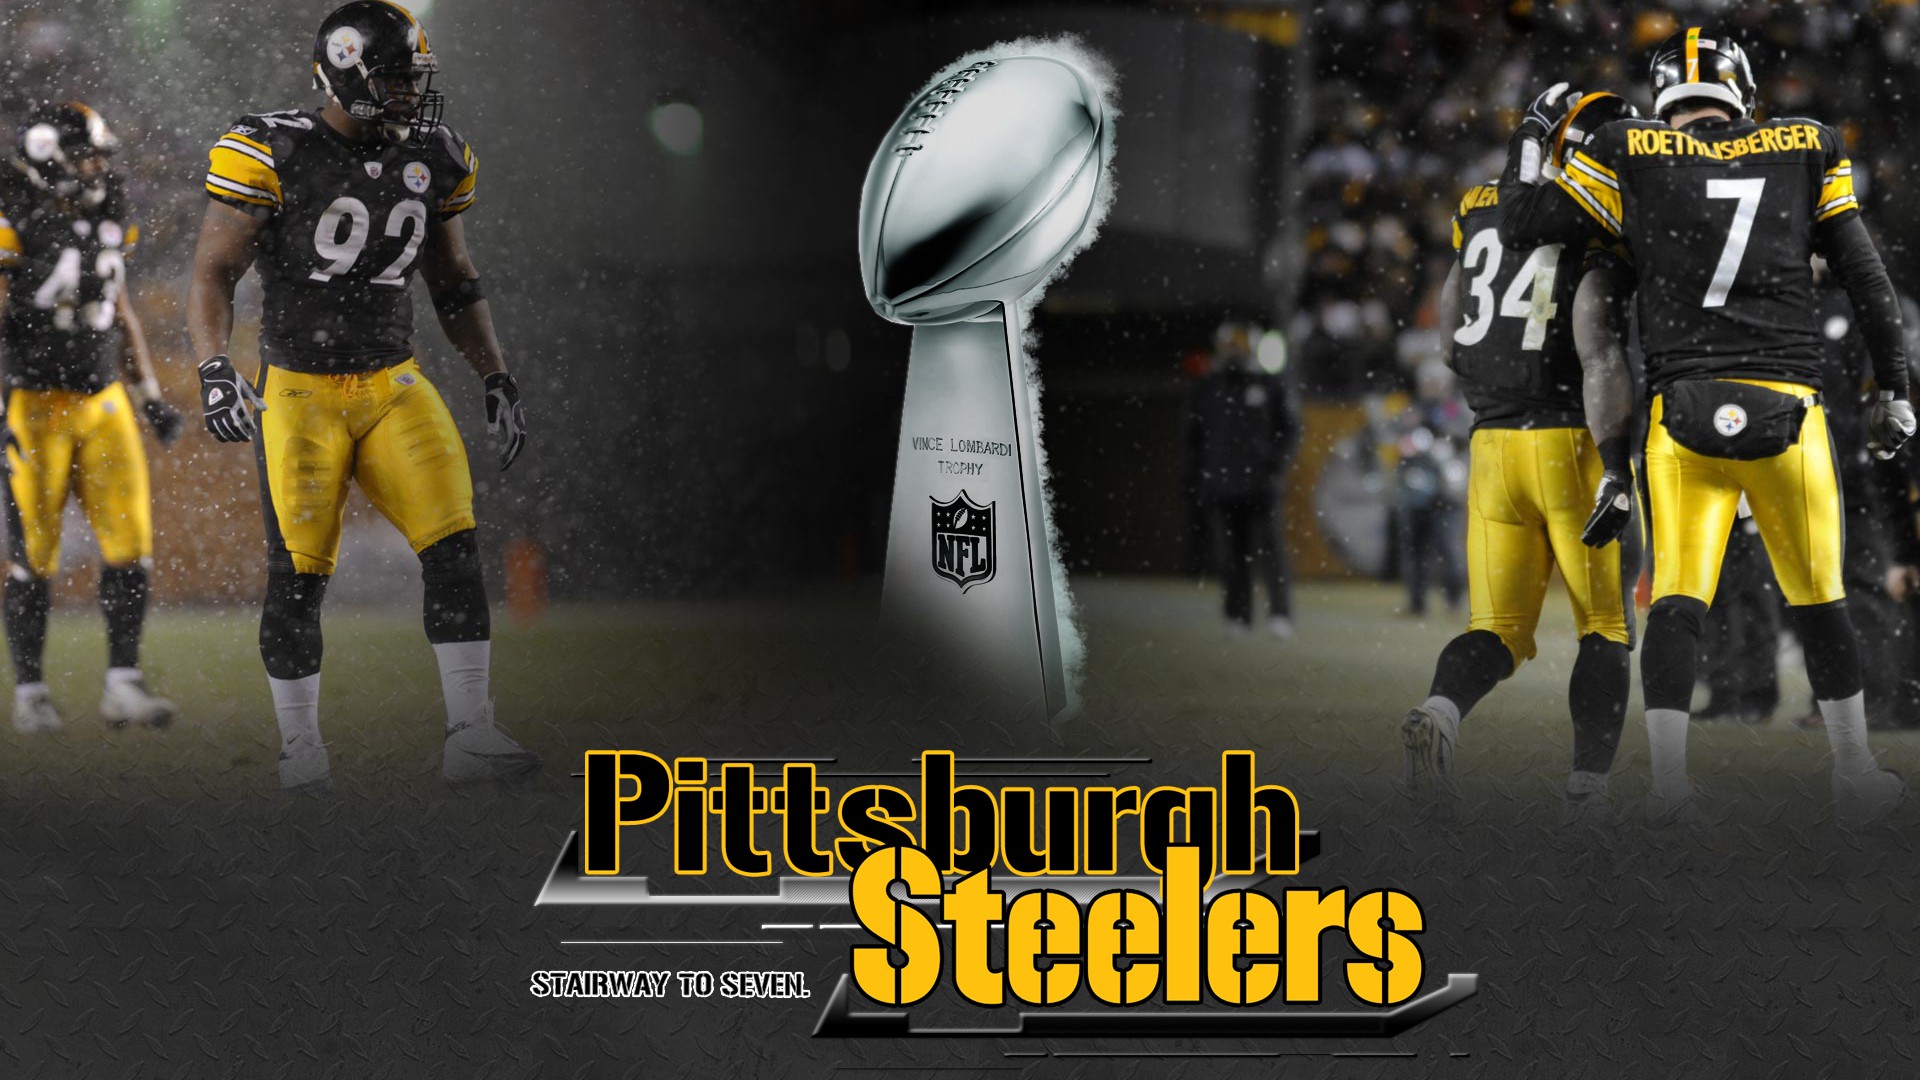 HD Pittsburgh Steelers Backgrounds With Resolution 1920X1080 pixel. You can make this wallpaper for your Mac or Windows Desktop Background, iPhone, Android or Tablet and another Smartphone device for free